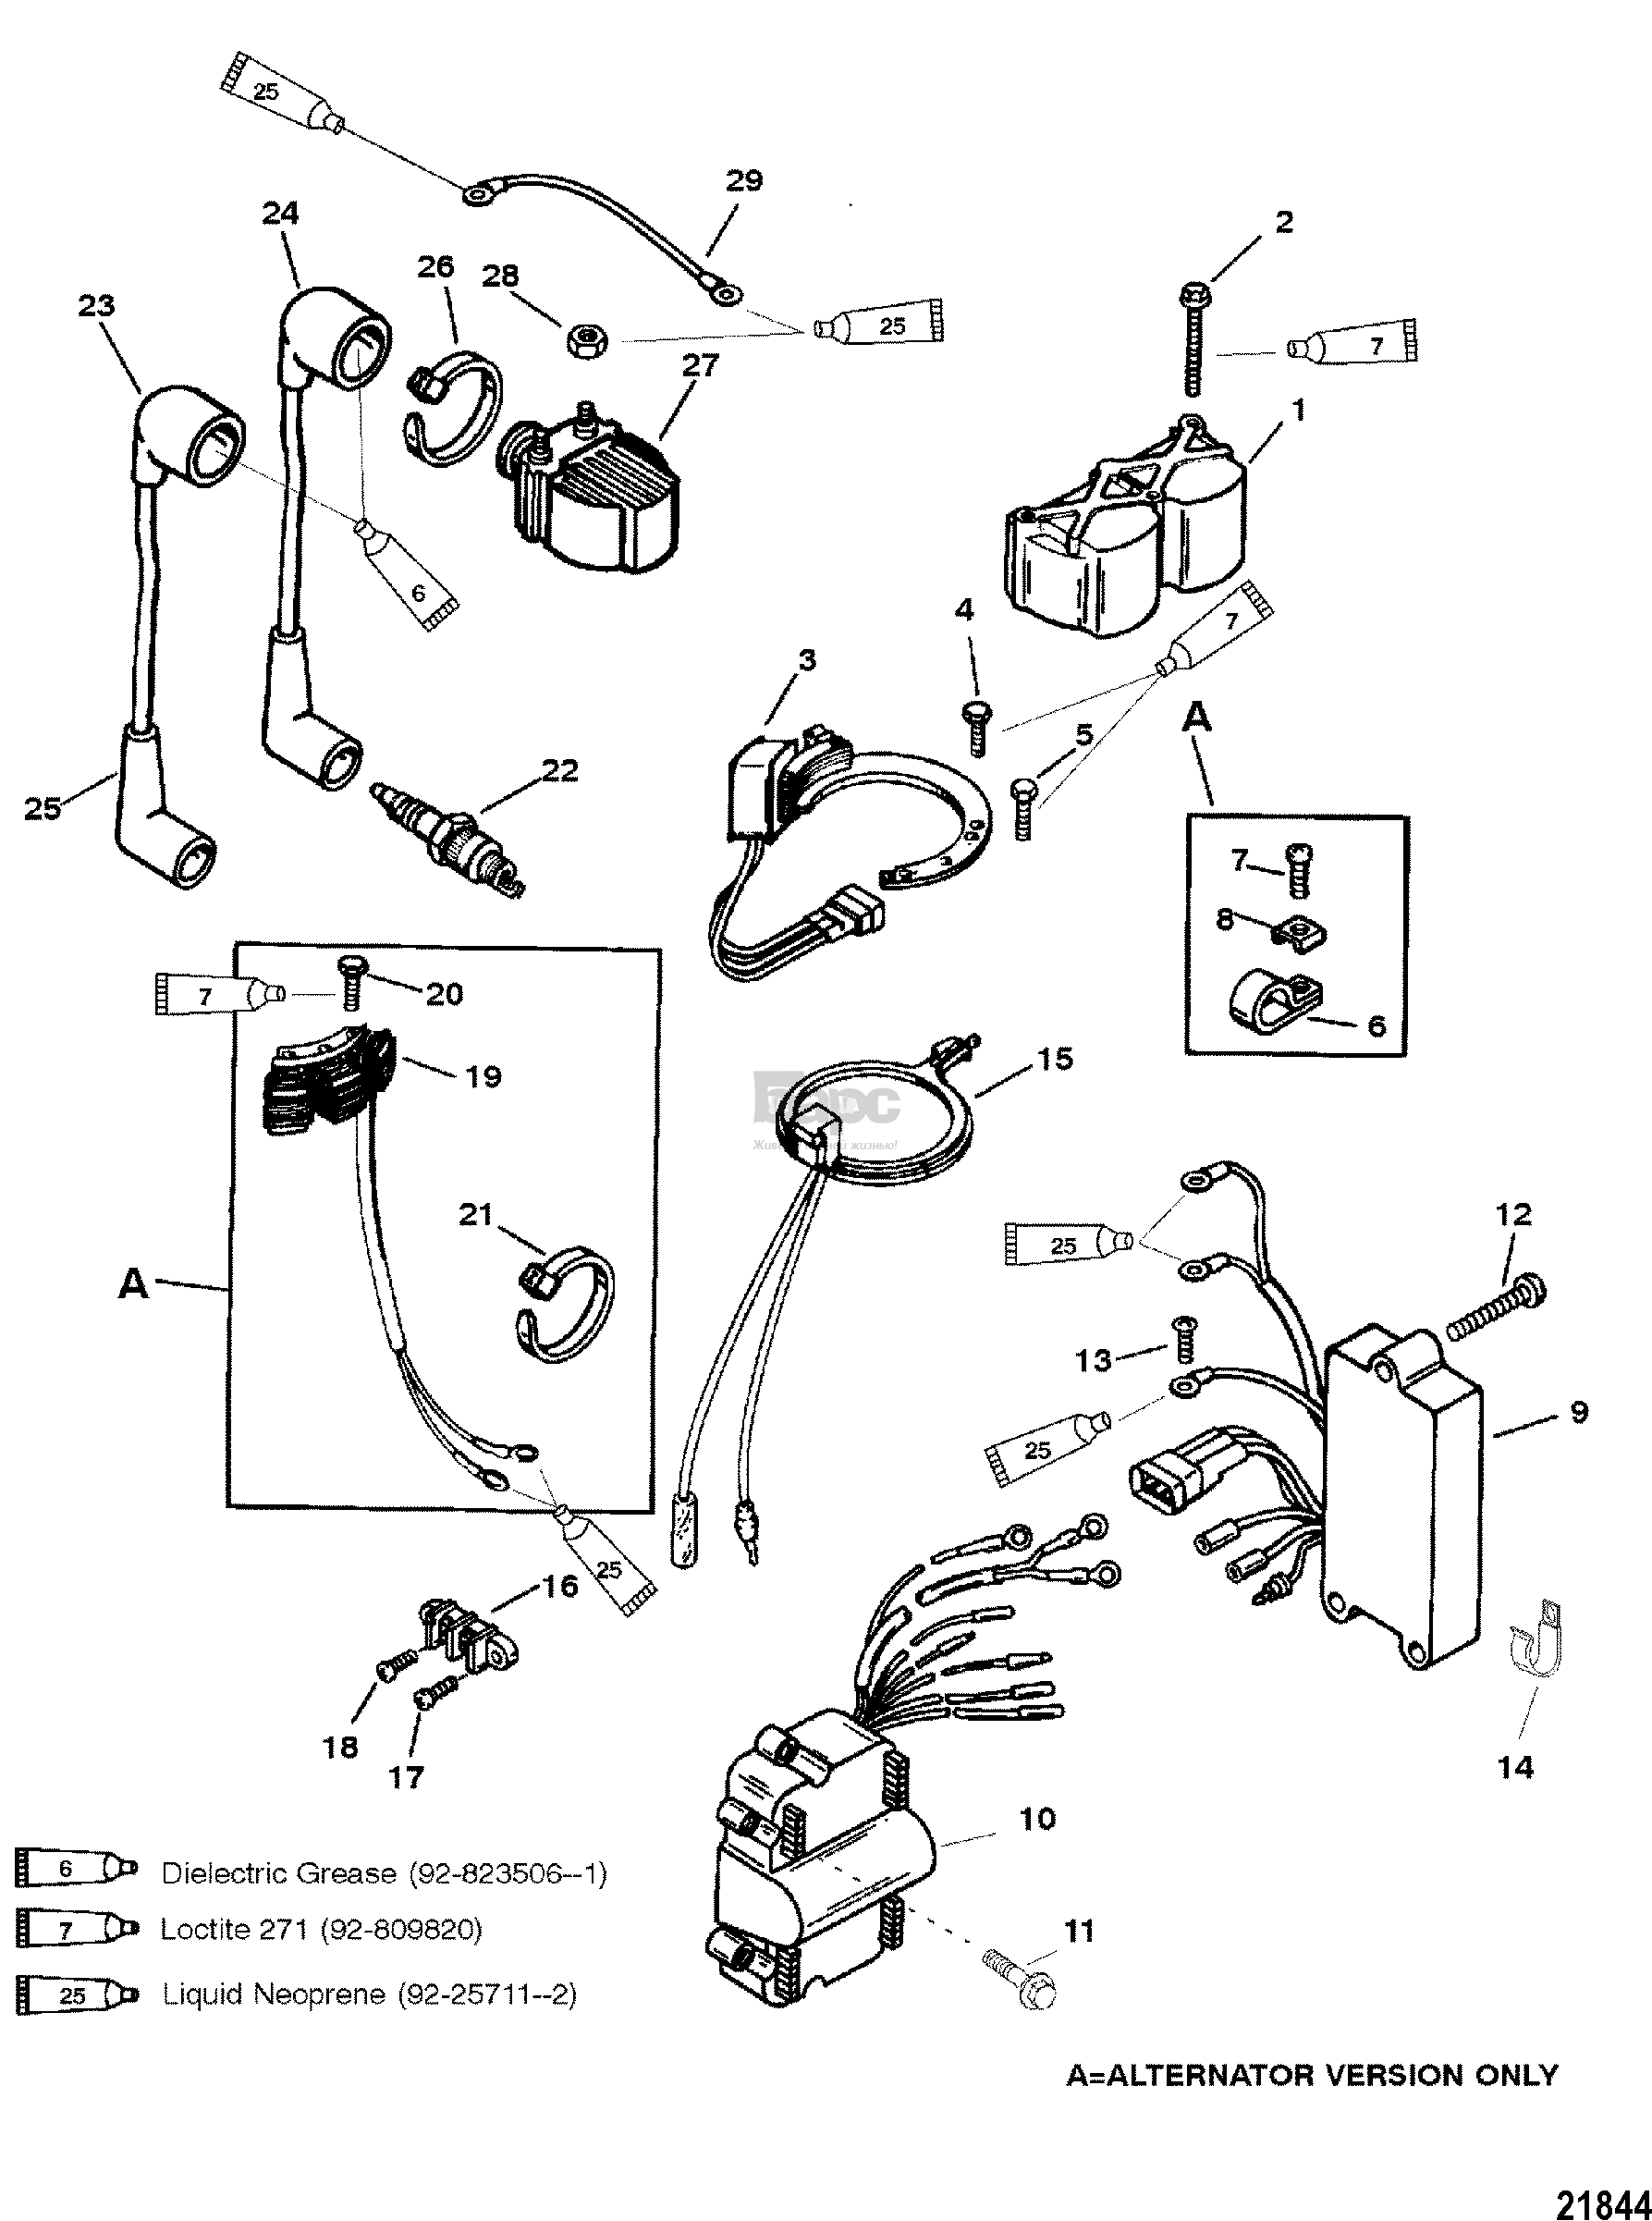 Ignition/Electrical Components